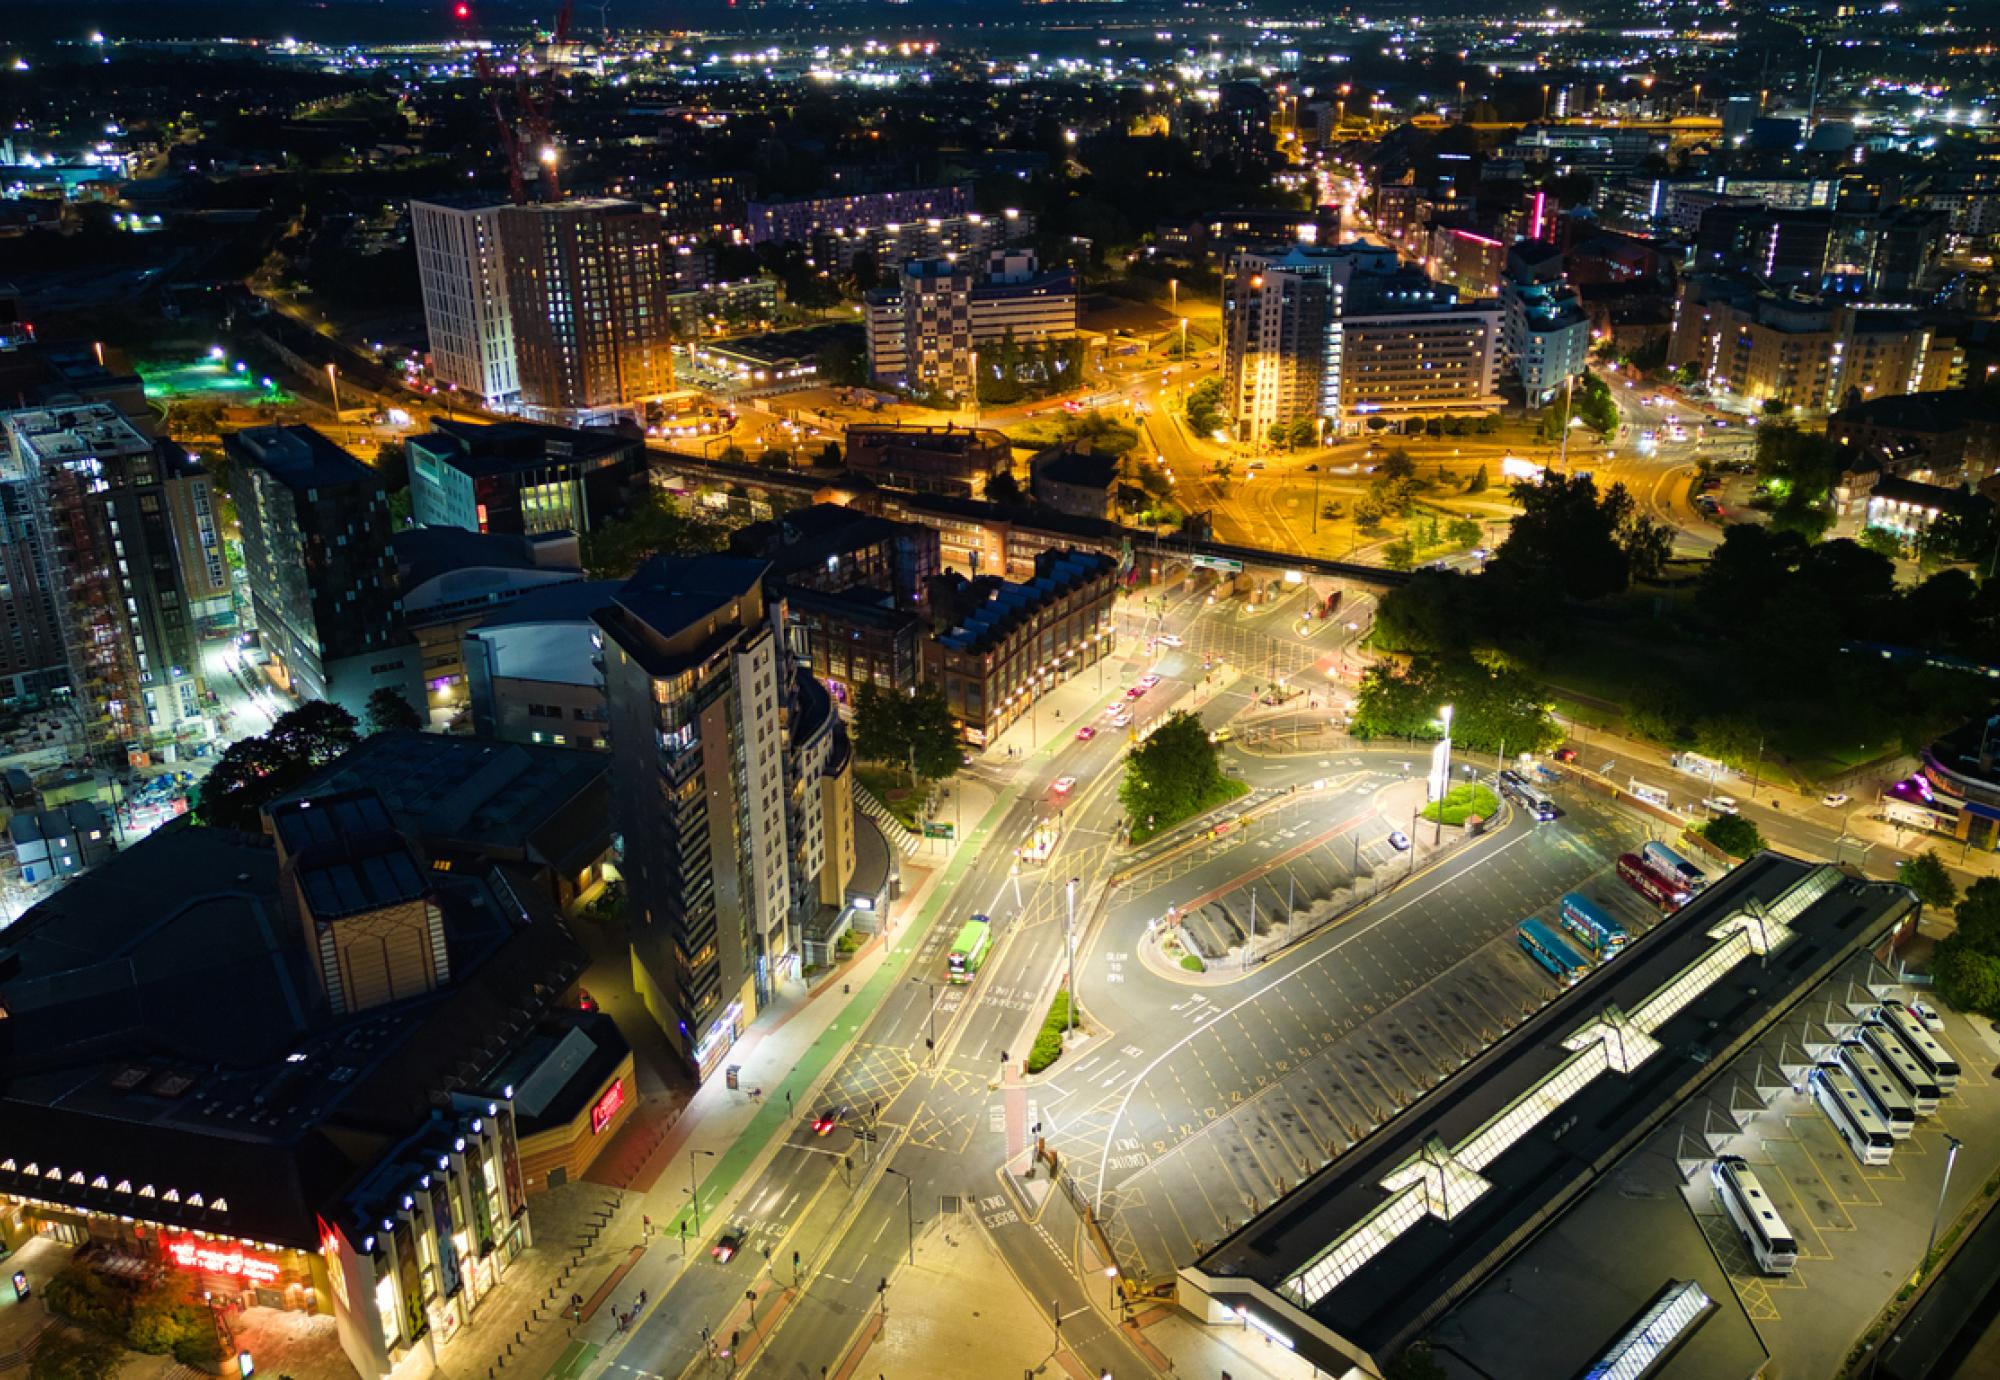 Aerial view with nightlife in Leeds